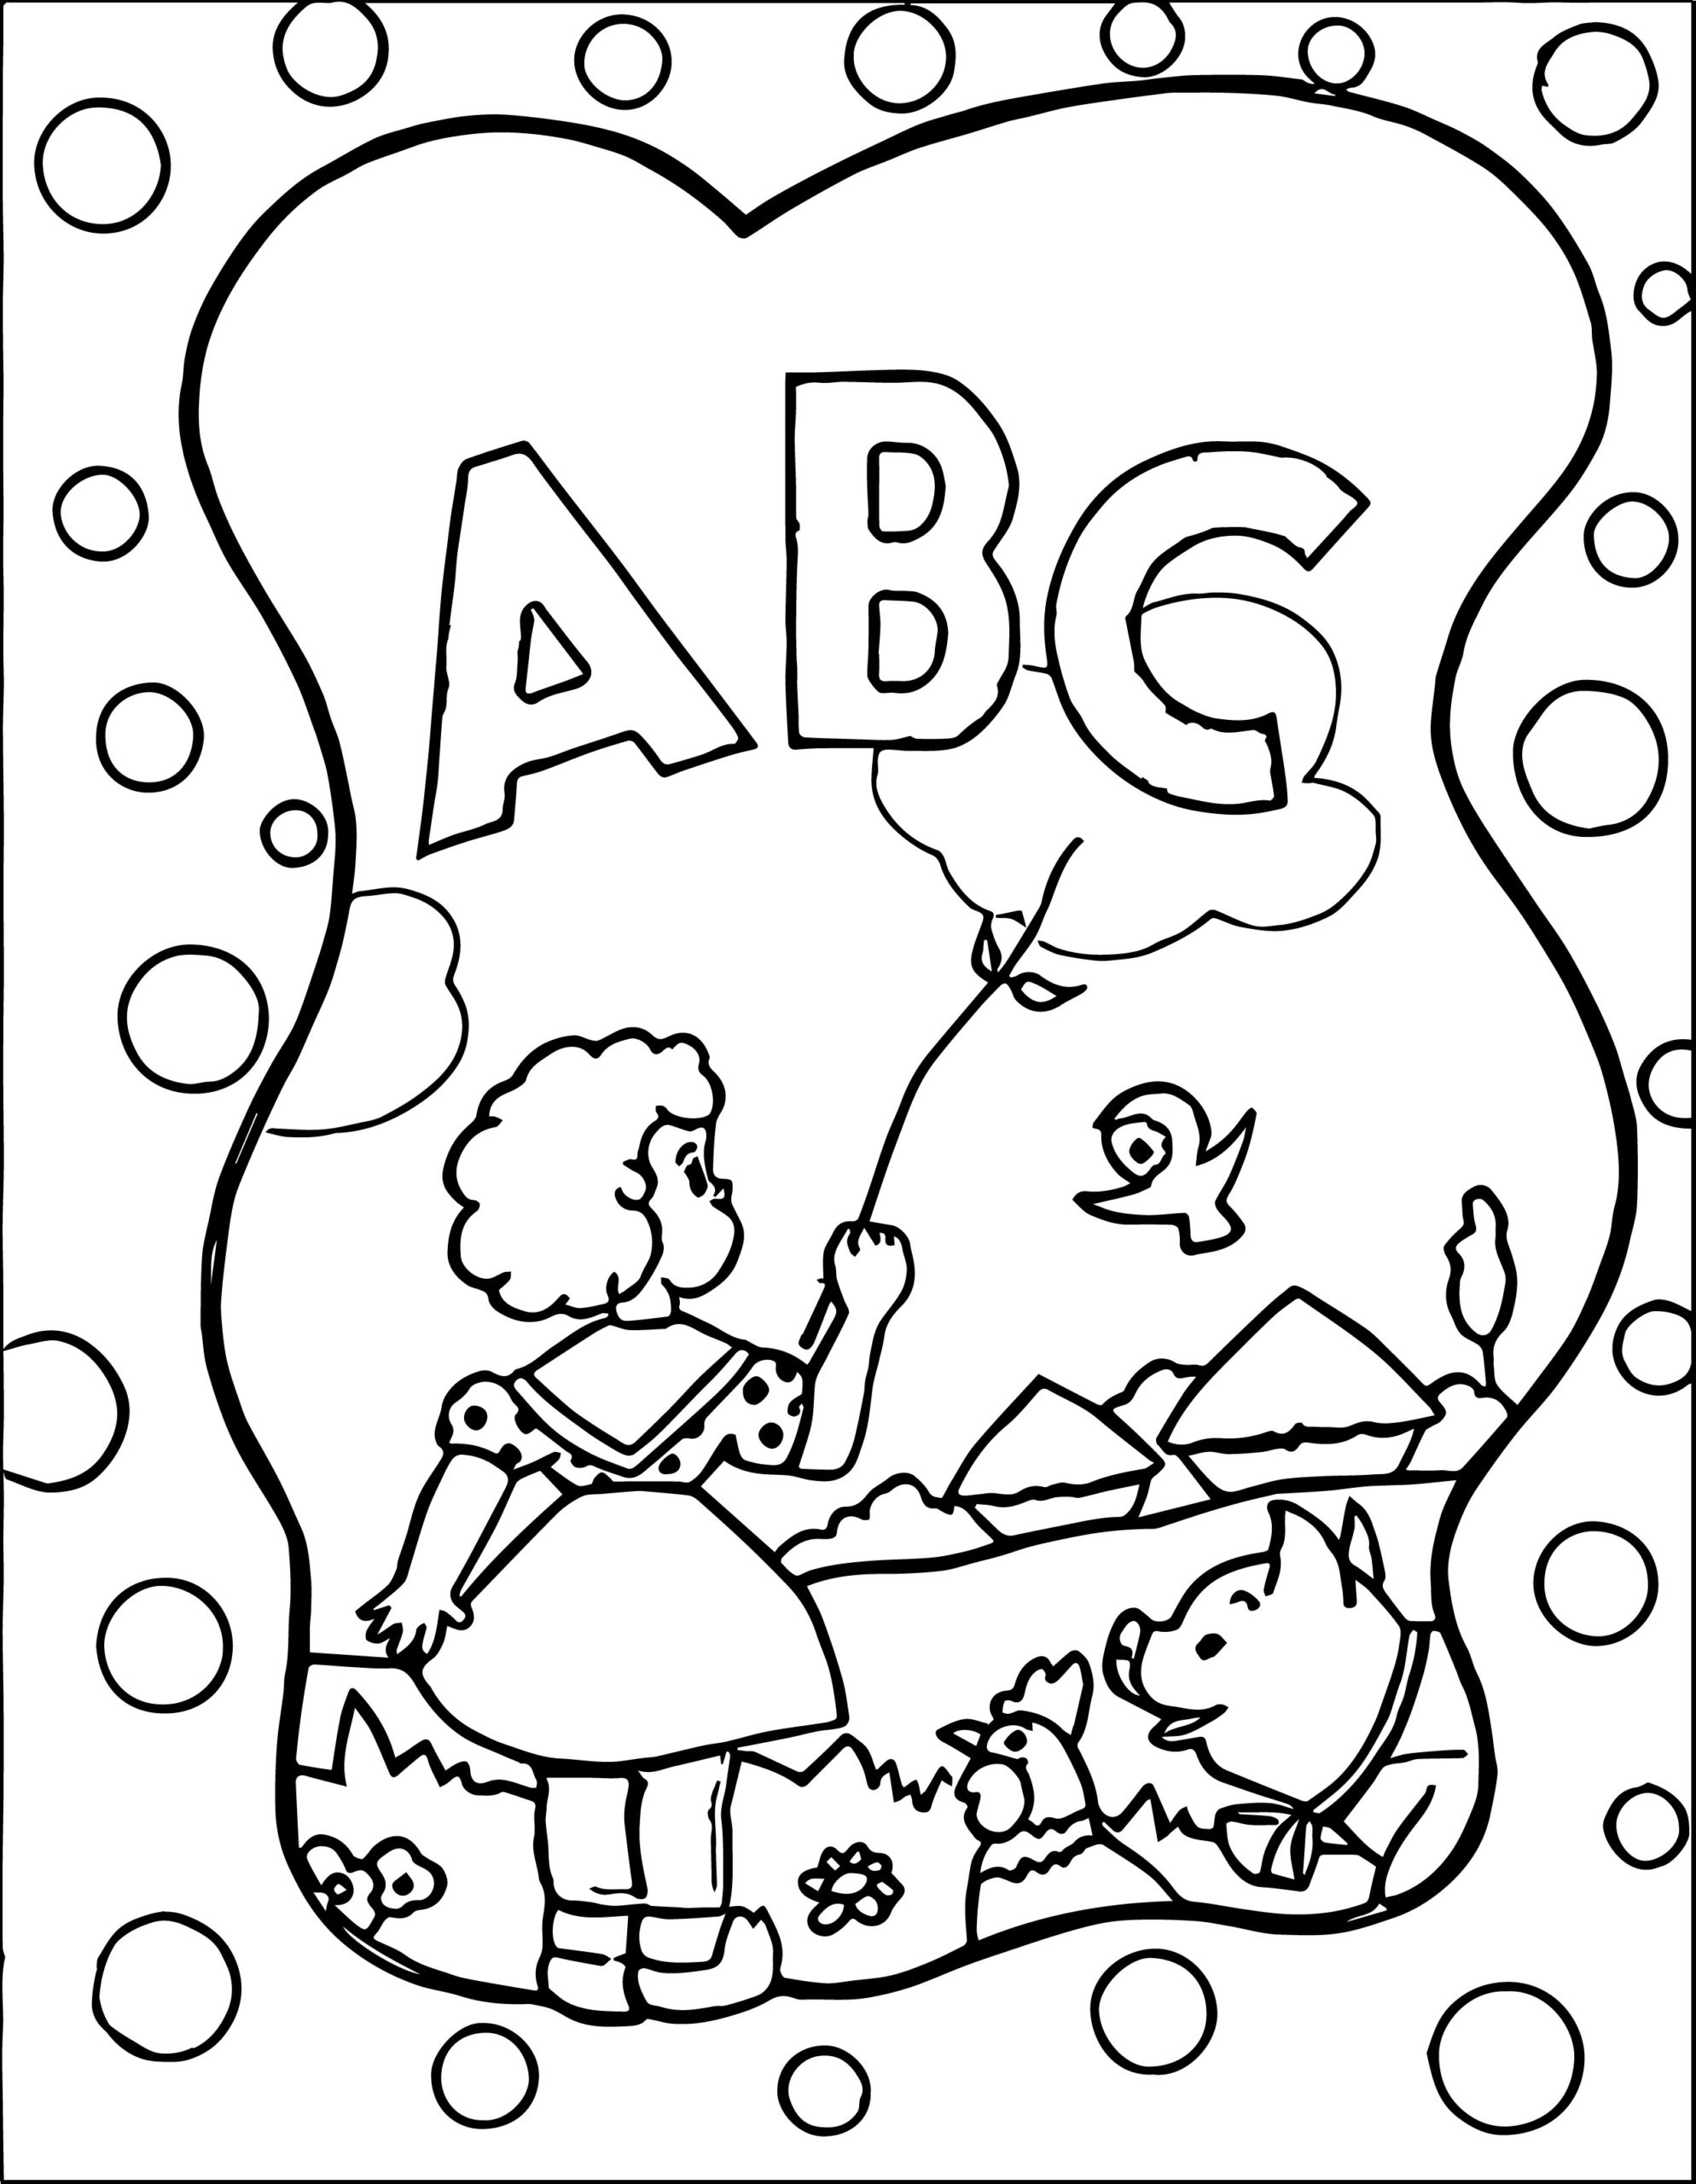 Coloring Pages : Top Brilliant Blocks Coloring Abcya For Genius ...